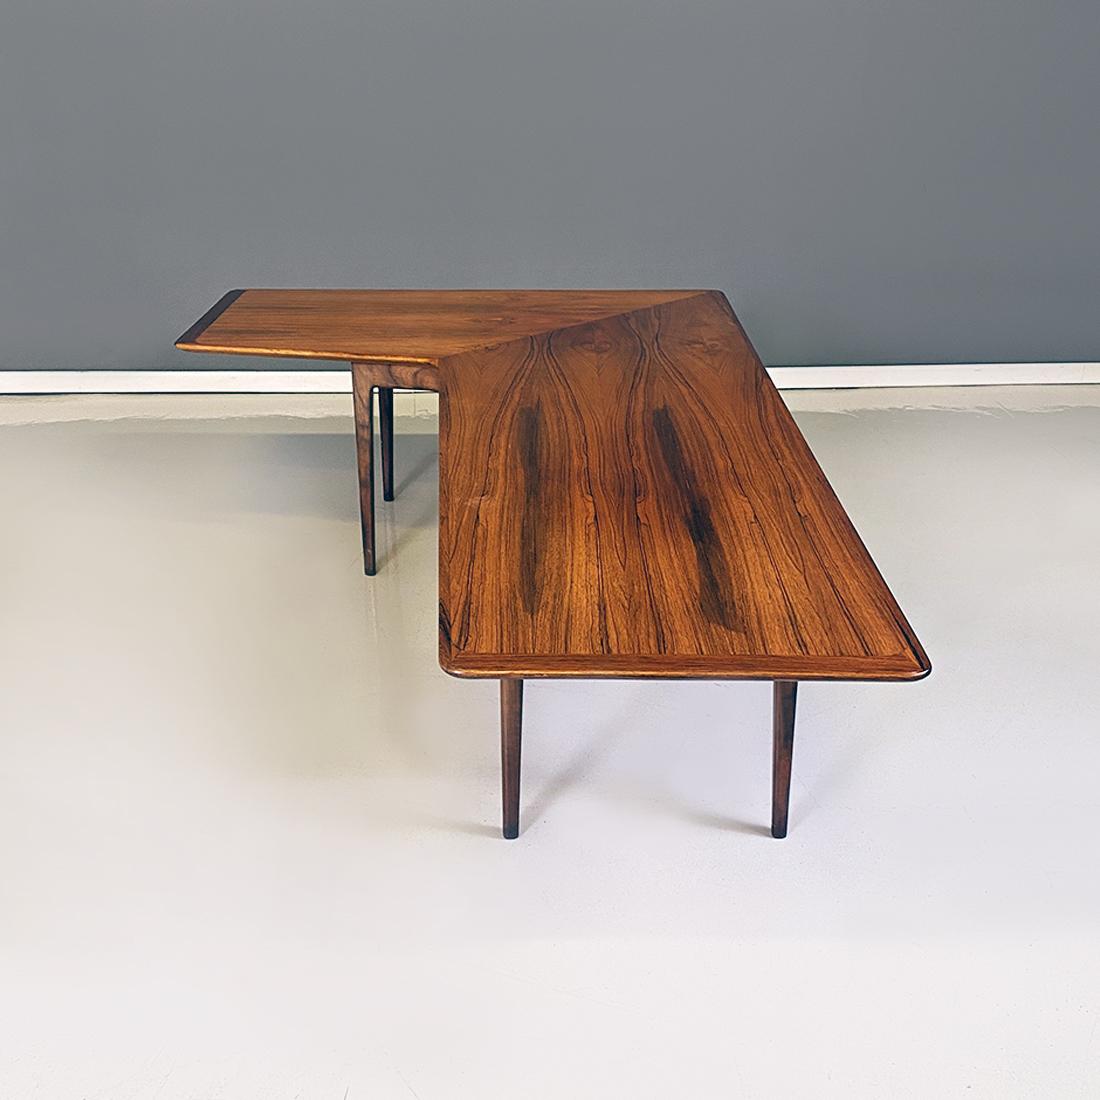 Italian Mid-Century Modern Solid Wood Coffee Table with a Boomerang Shape, 1960s 2